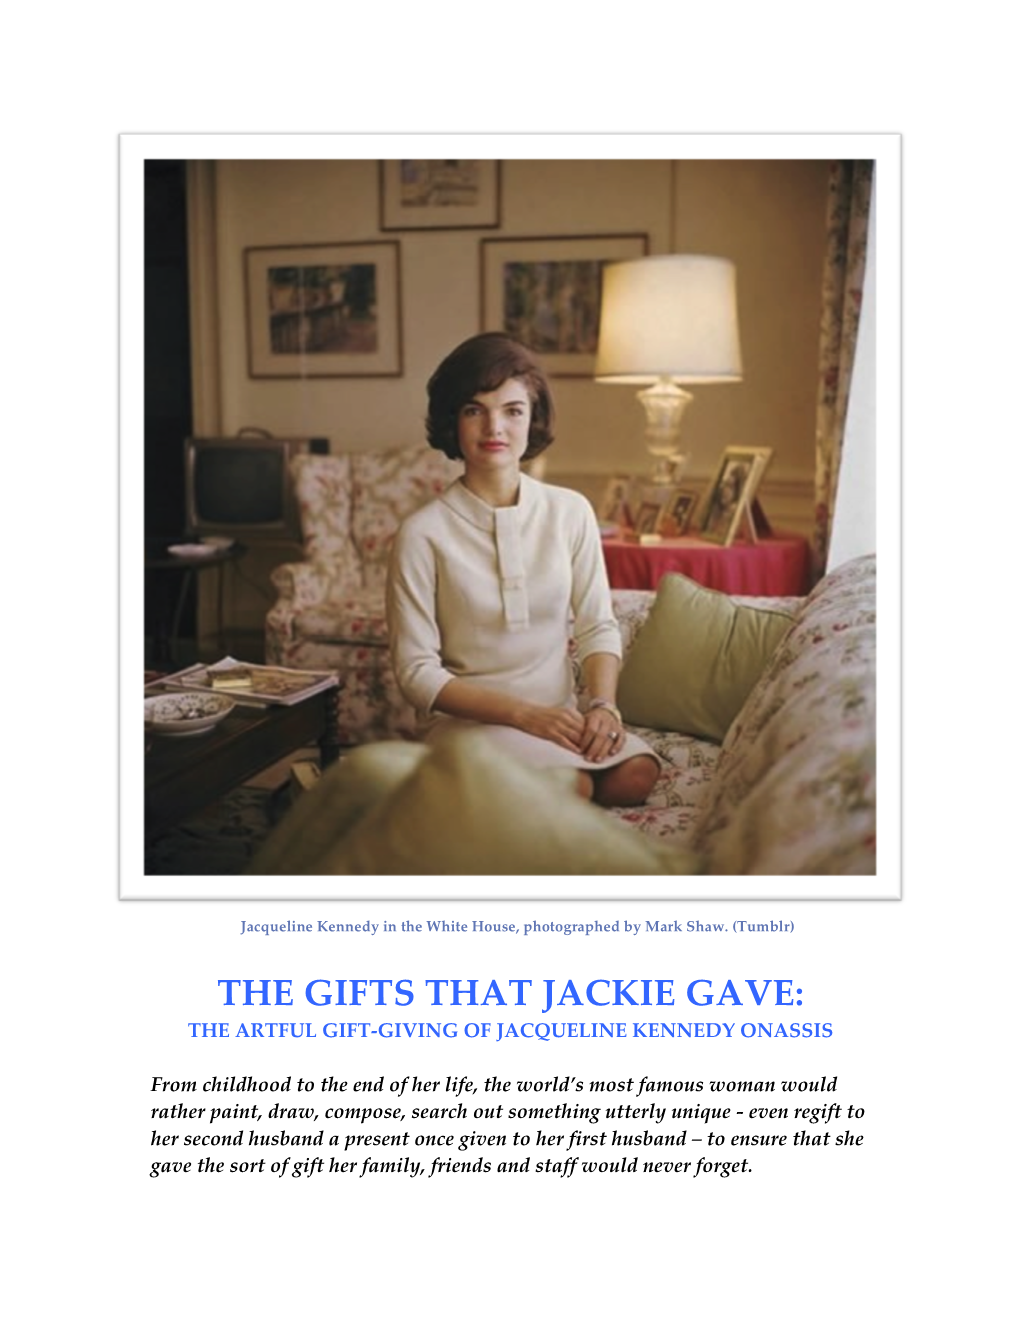 The Gifts That Jackie Gave: the Artful Gift-Giving of Jacqueline Kennedy Onassis